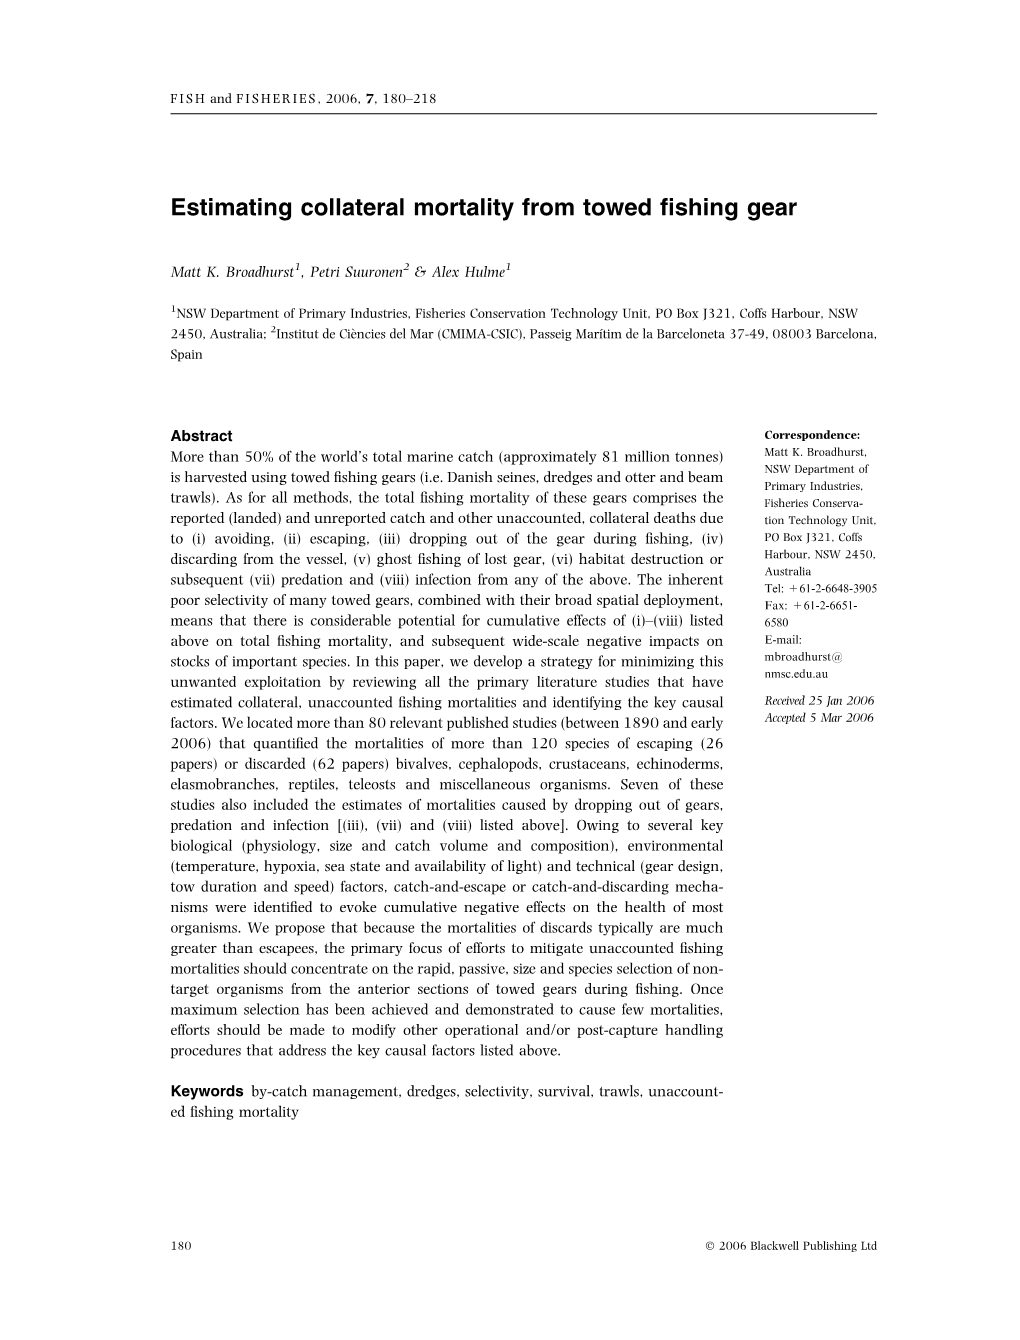 Estimating Collateral Mortality from Towed Fishing Gear